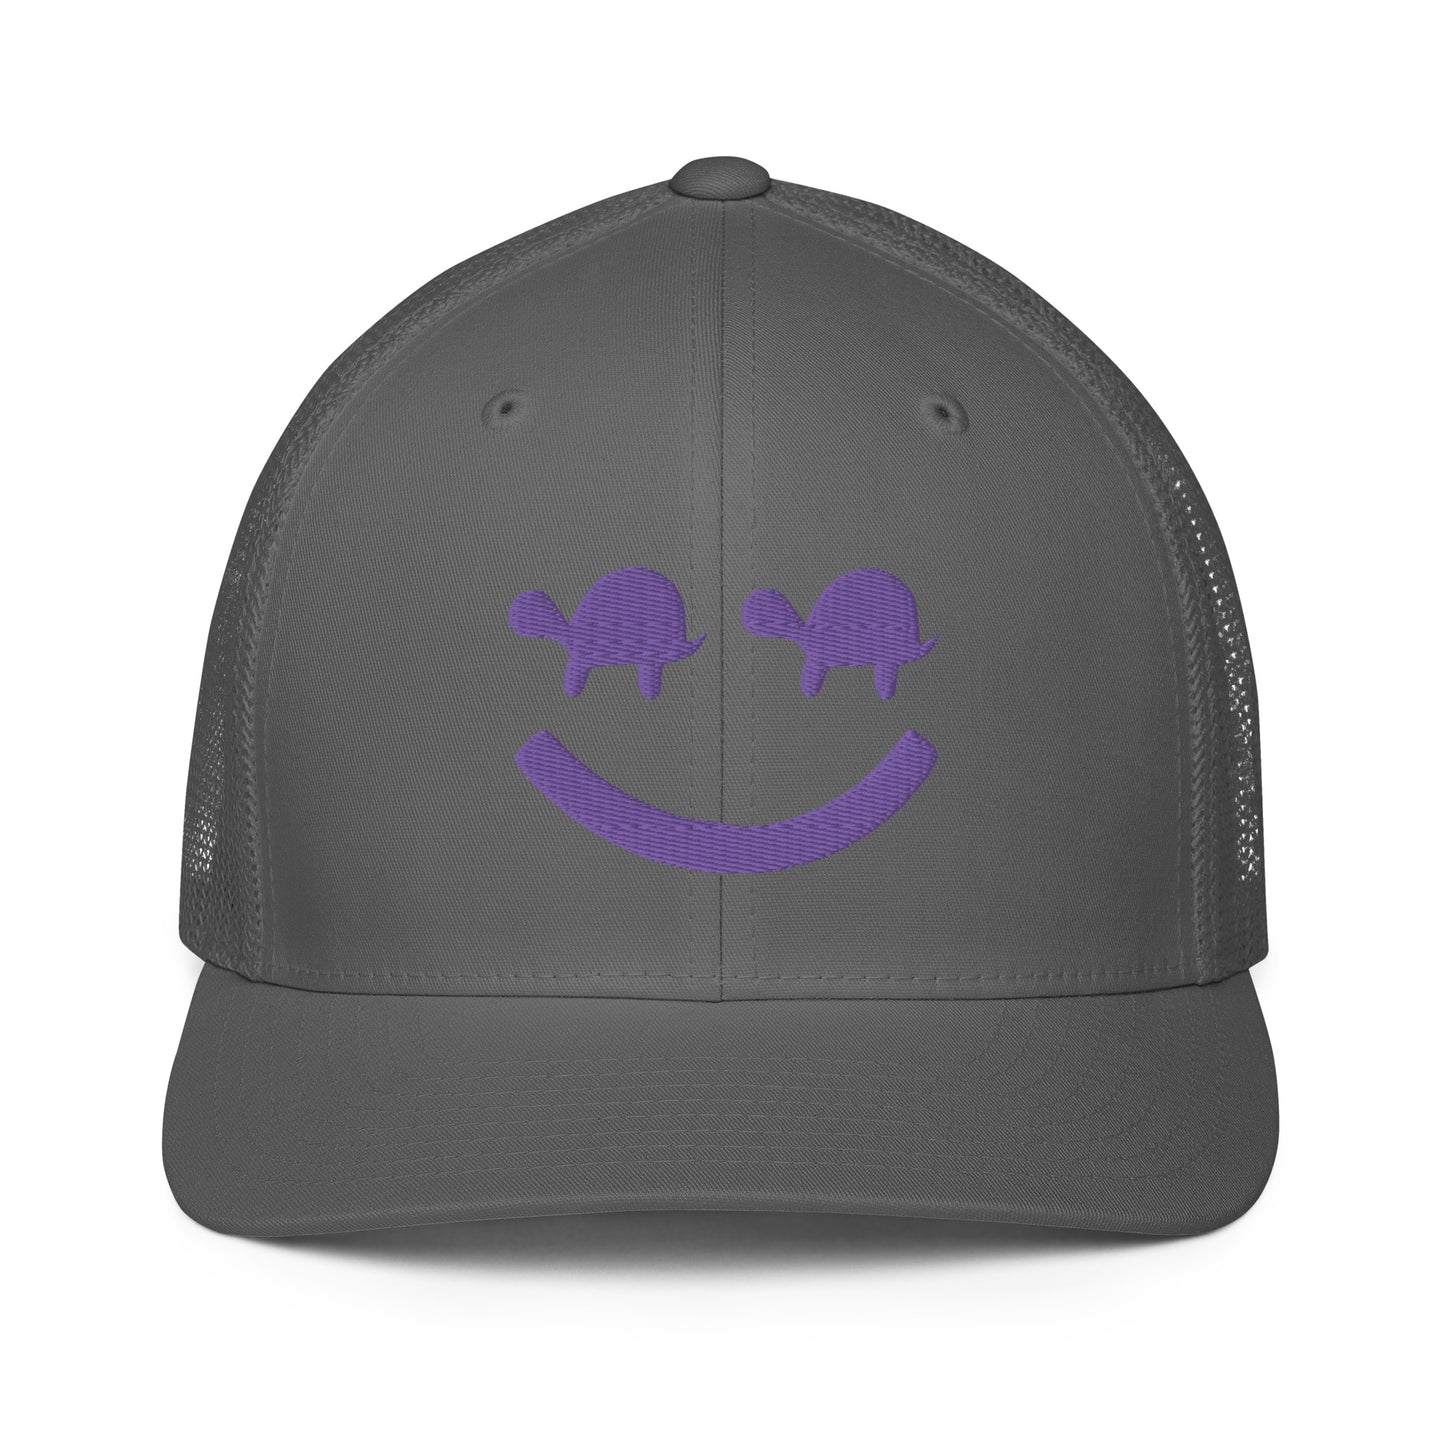 Turtle Face Mesh Fitted Hat